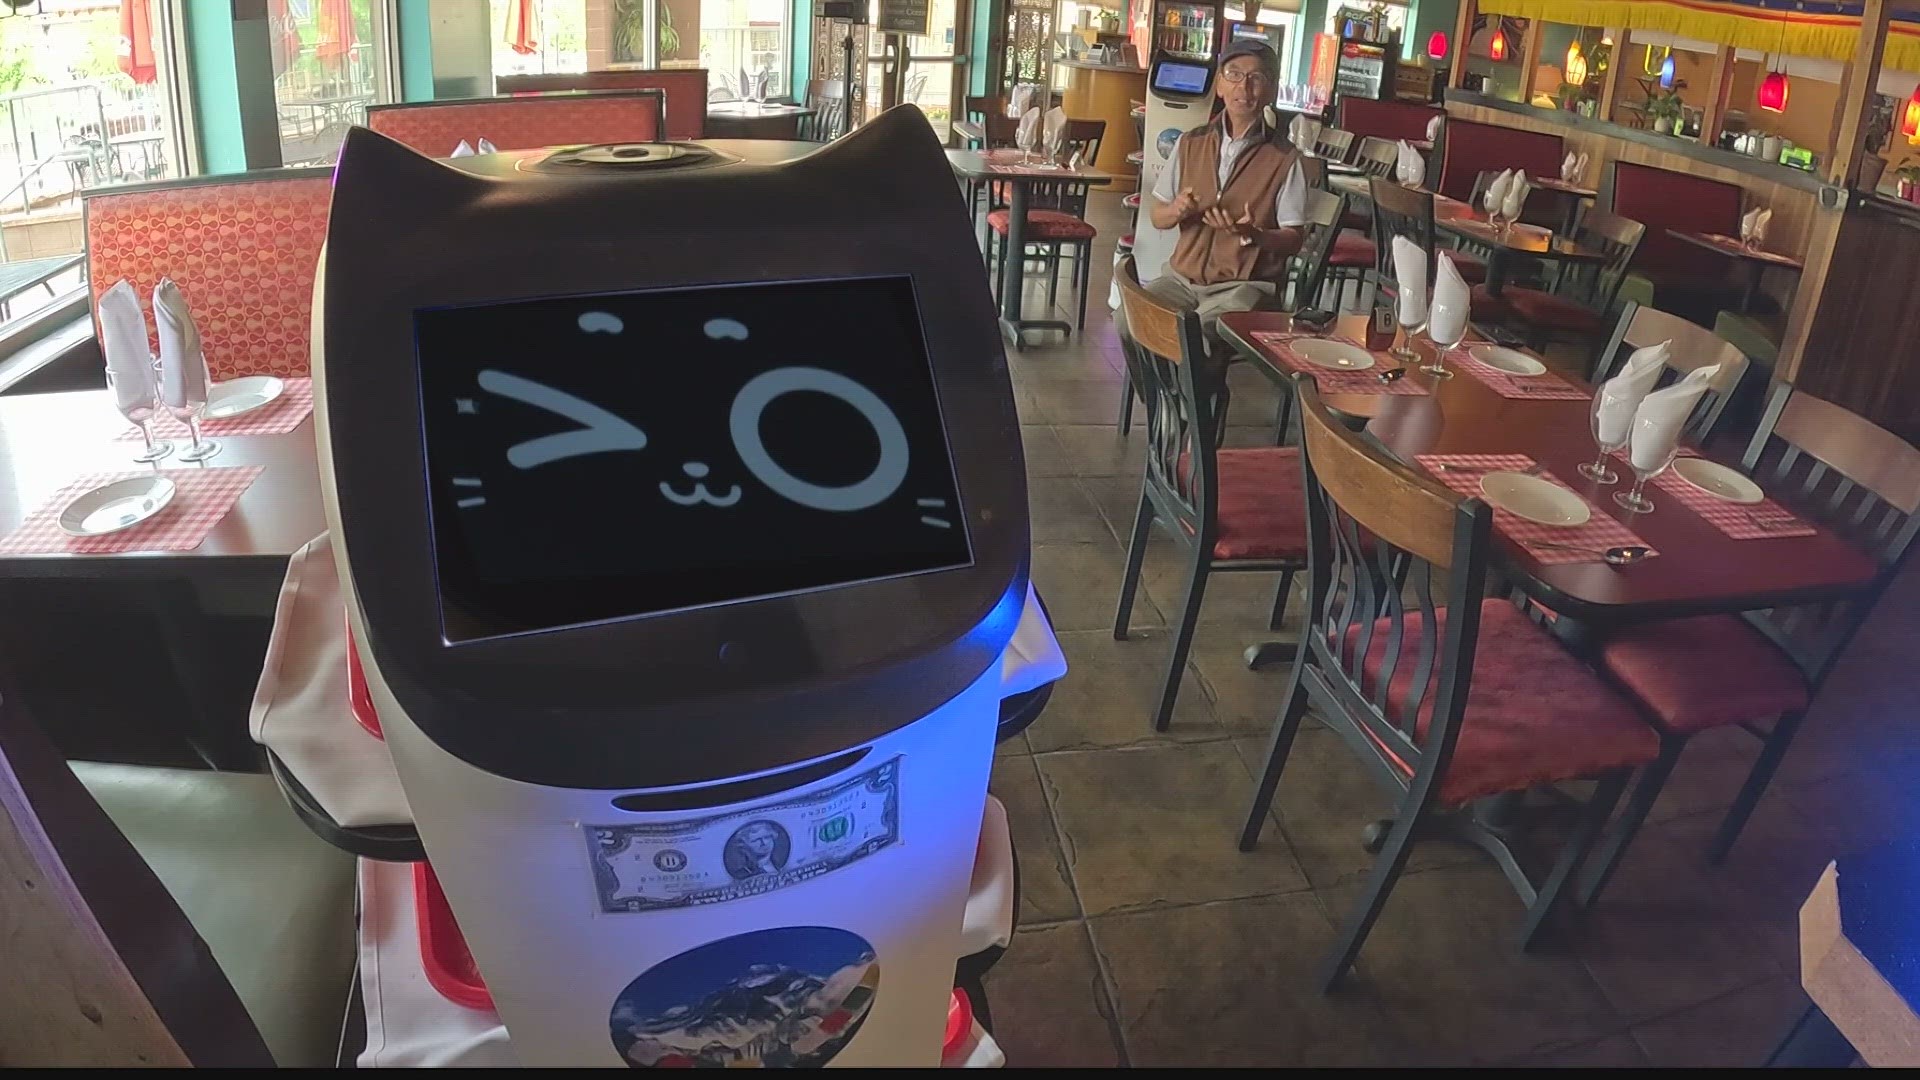 A restaurant in Glenwood Springs has found a high-tech way to deal with the difficulty of finding people to work by using robots to serve customers.